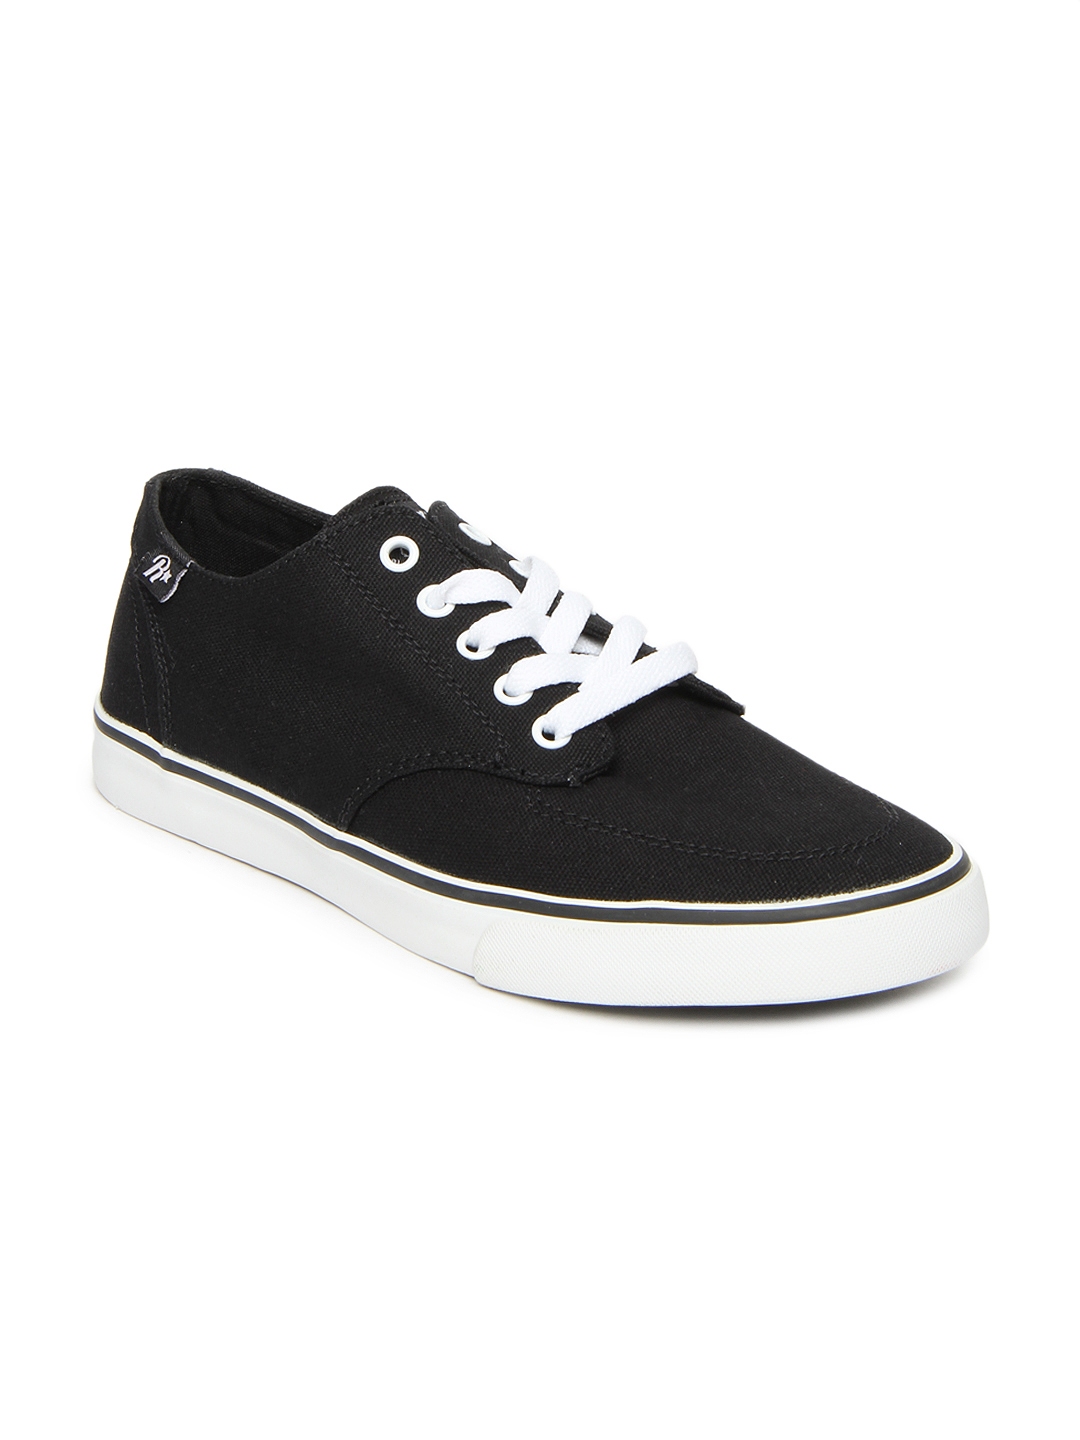 Buy Roadster Men Black Canvas Shoes - Casual Shoes for Men 288622 | Myntra